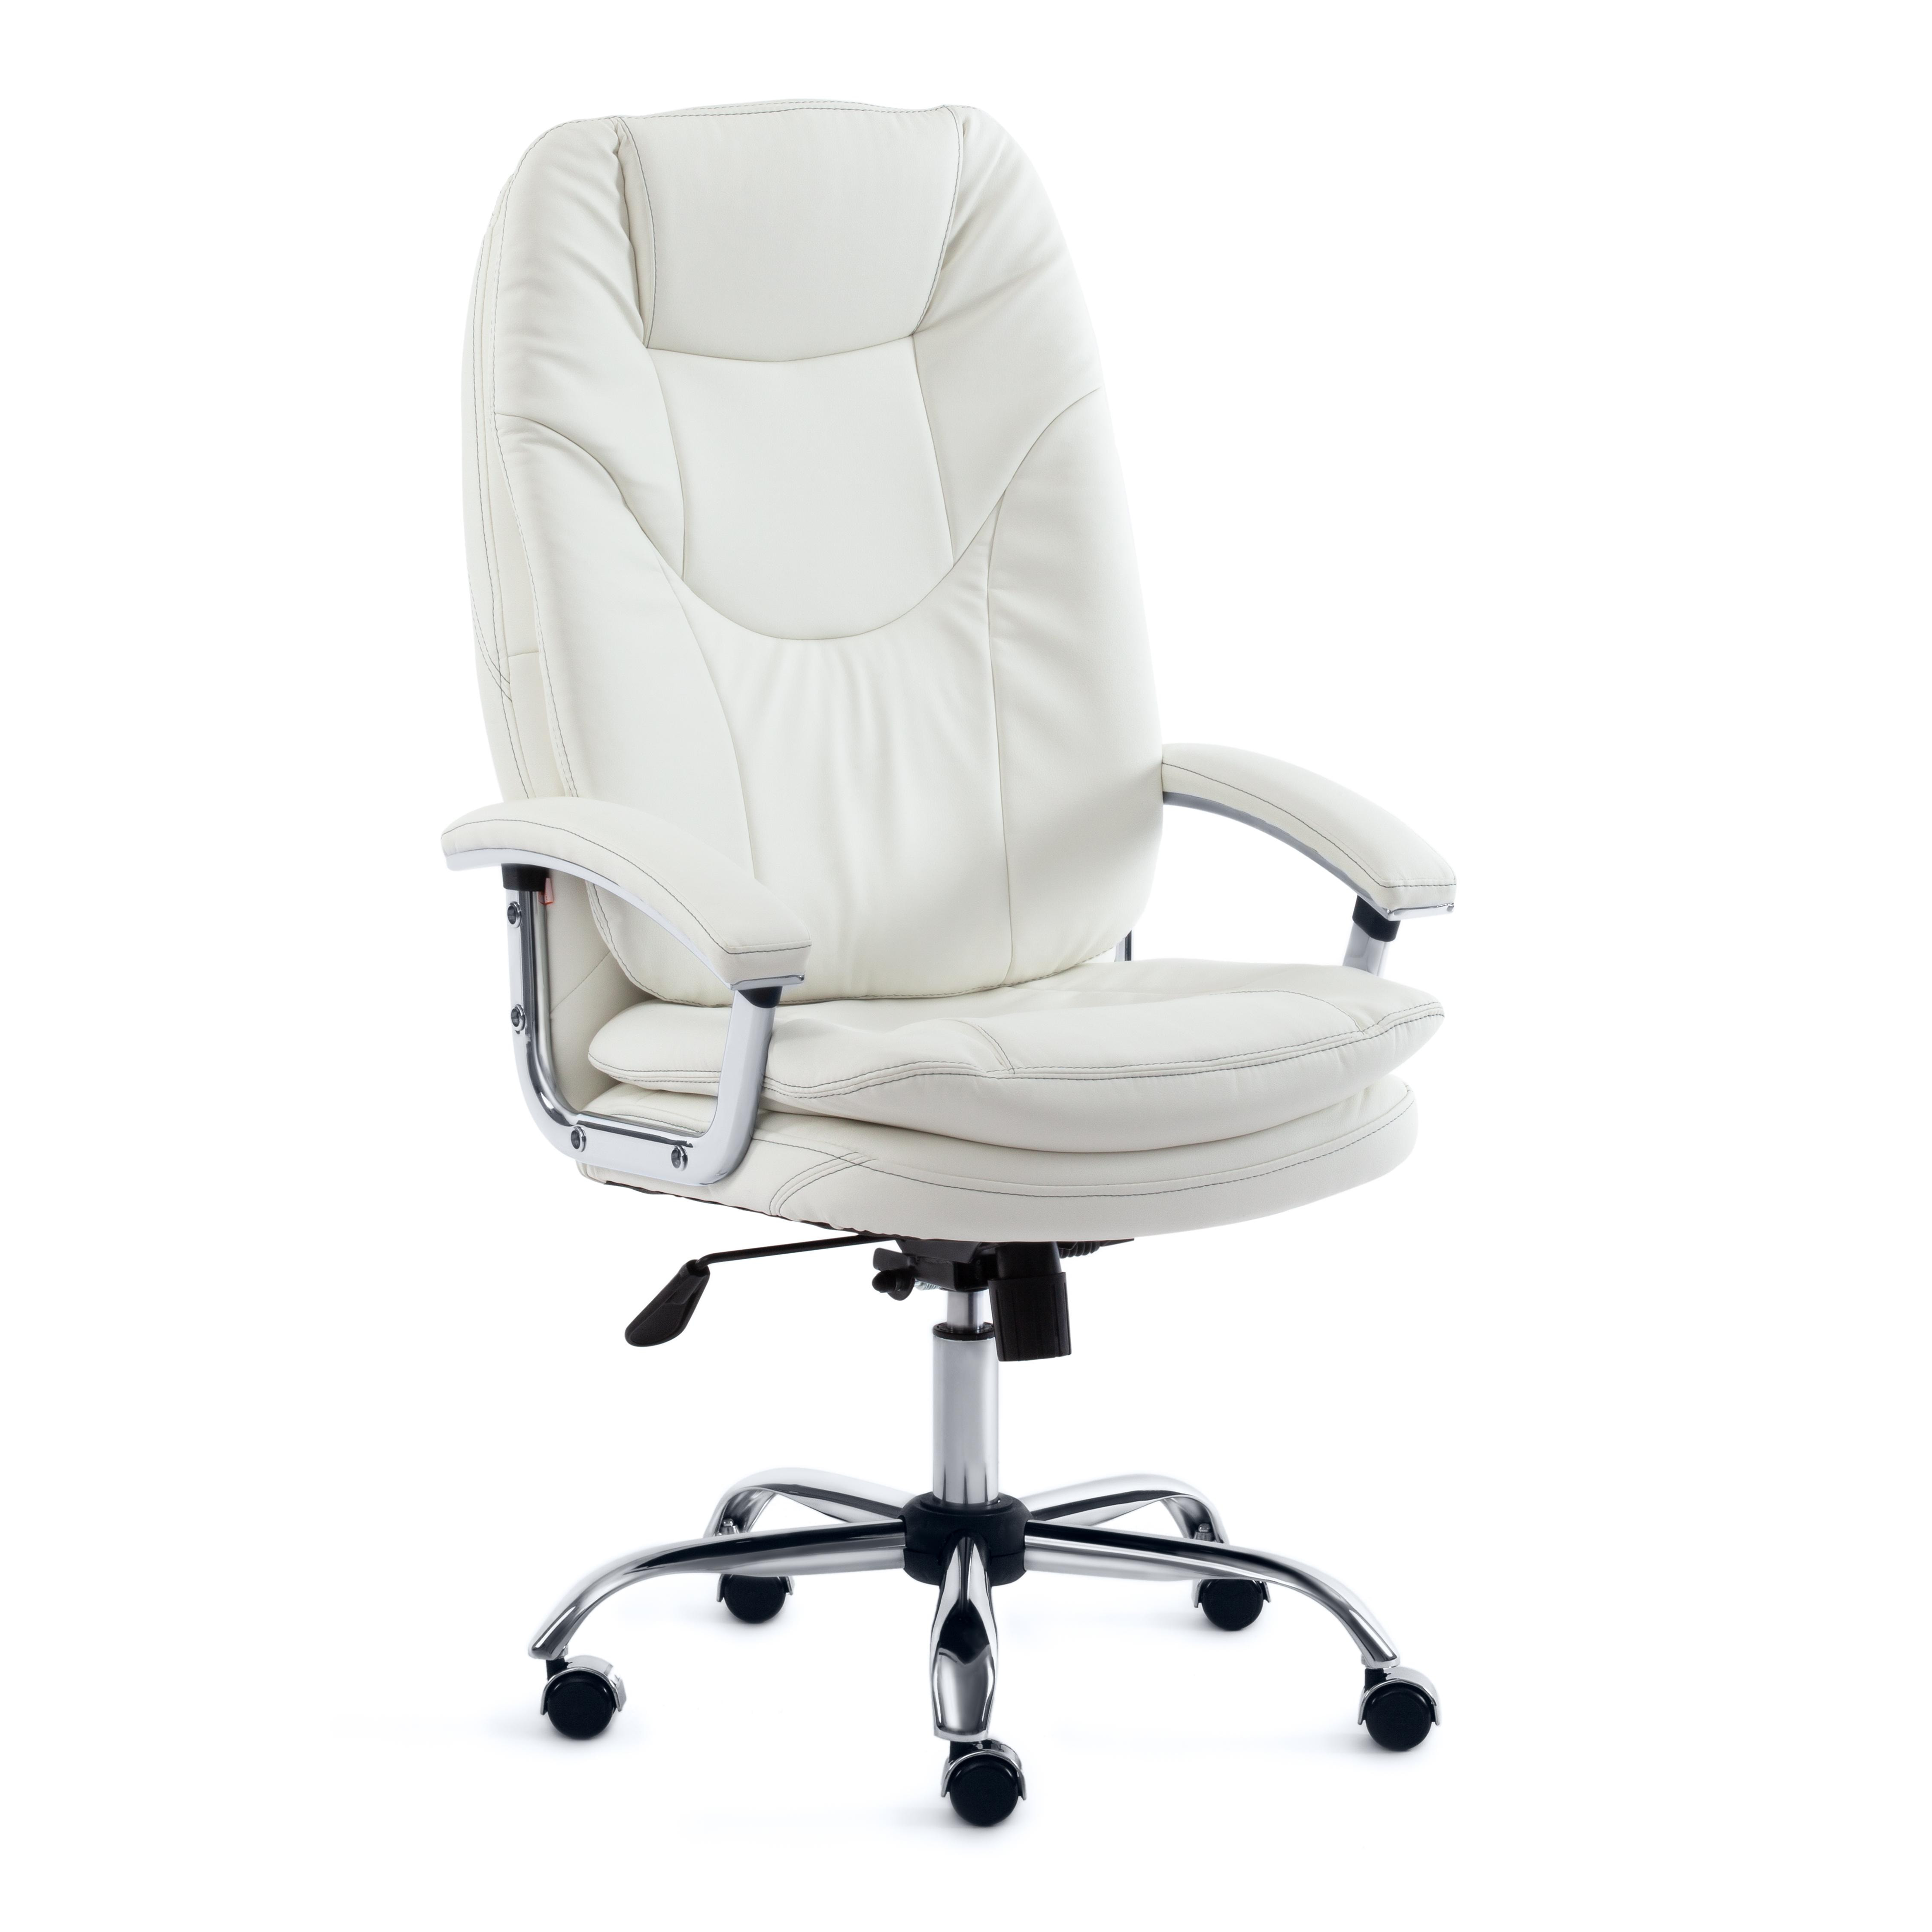  TetChair Softy Lux white